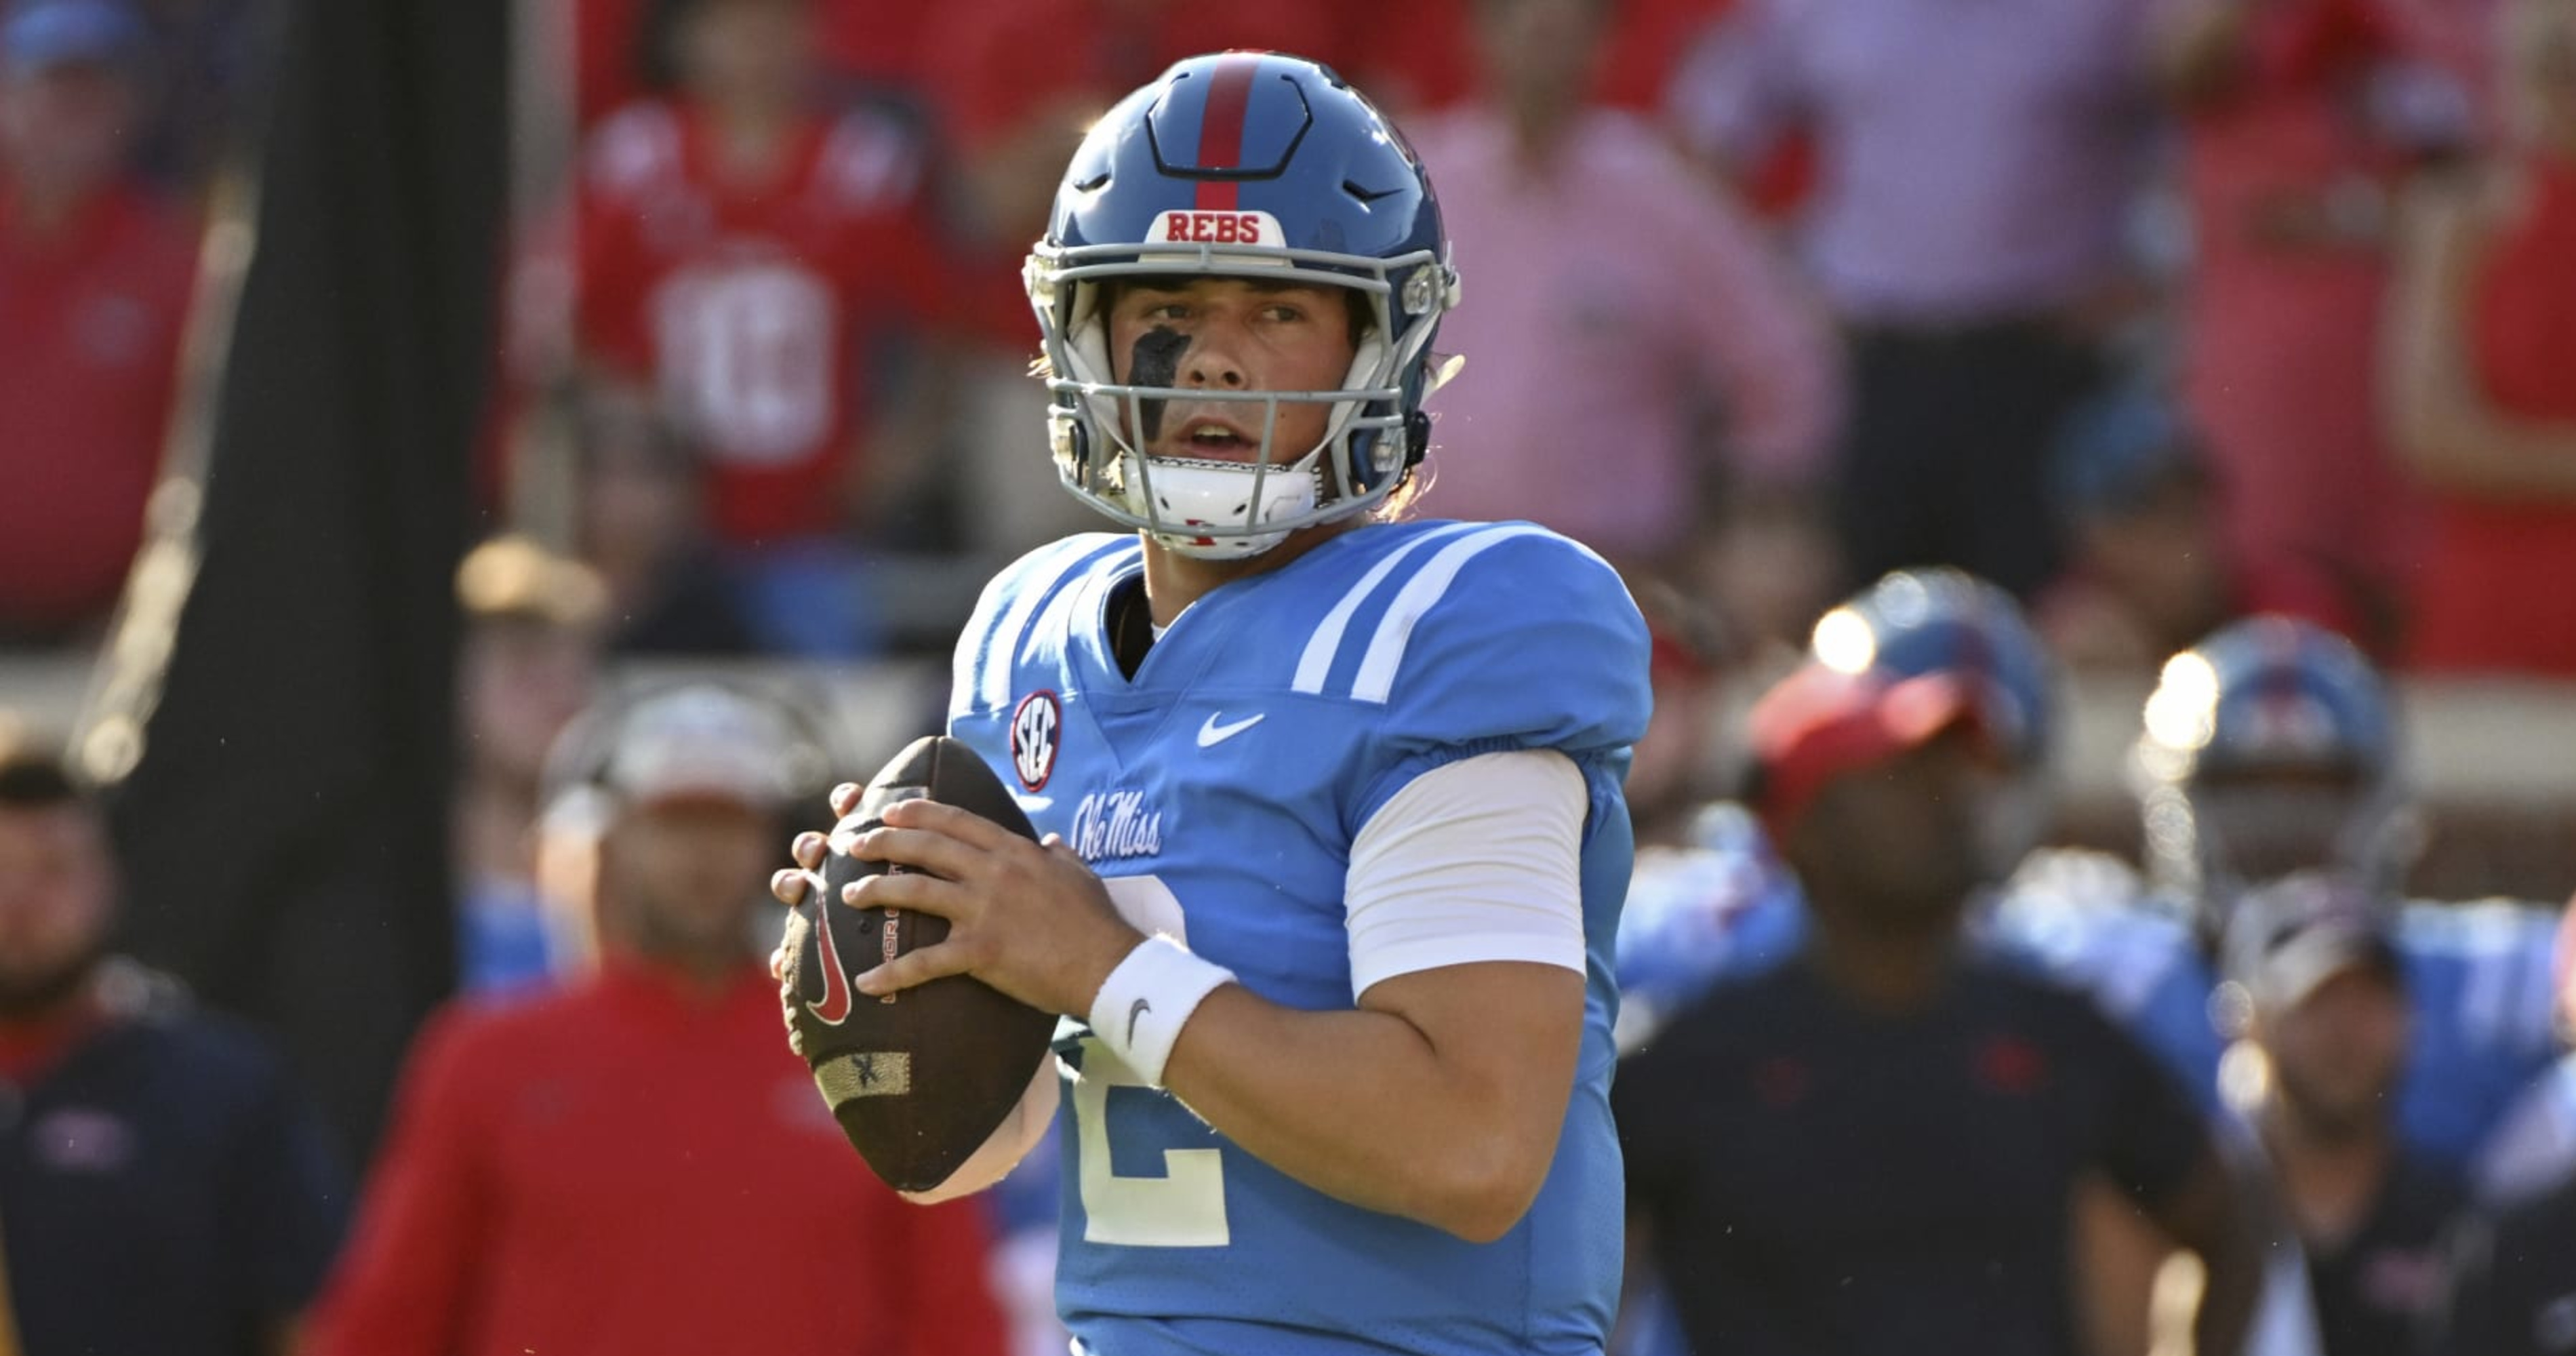 College football: Week 2 rankings see three Group of Five QBs on rise